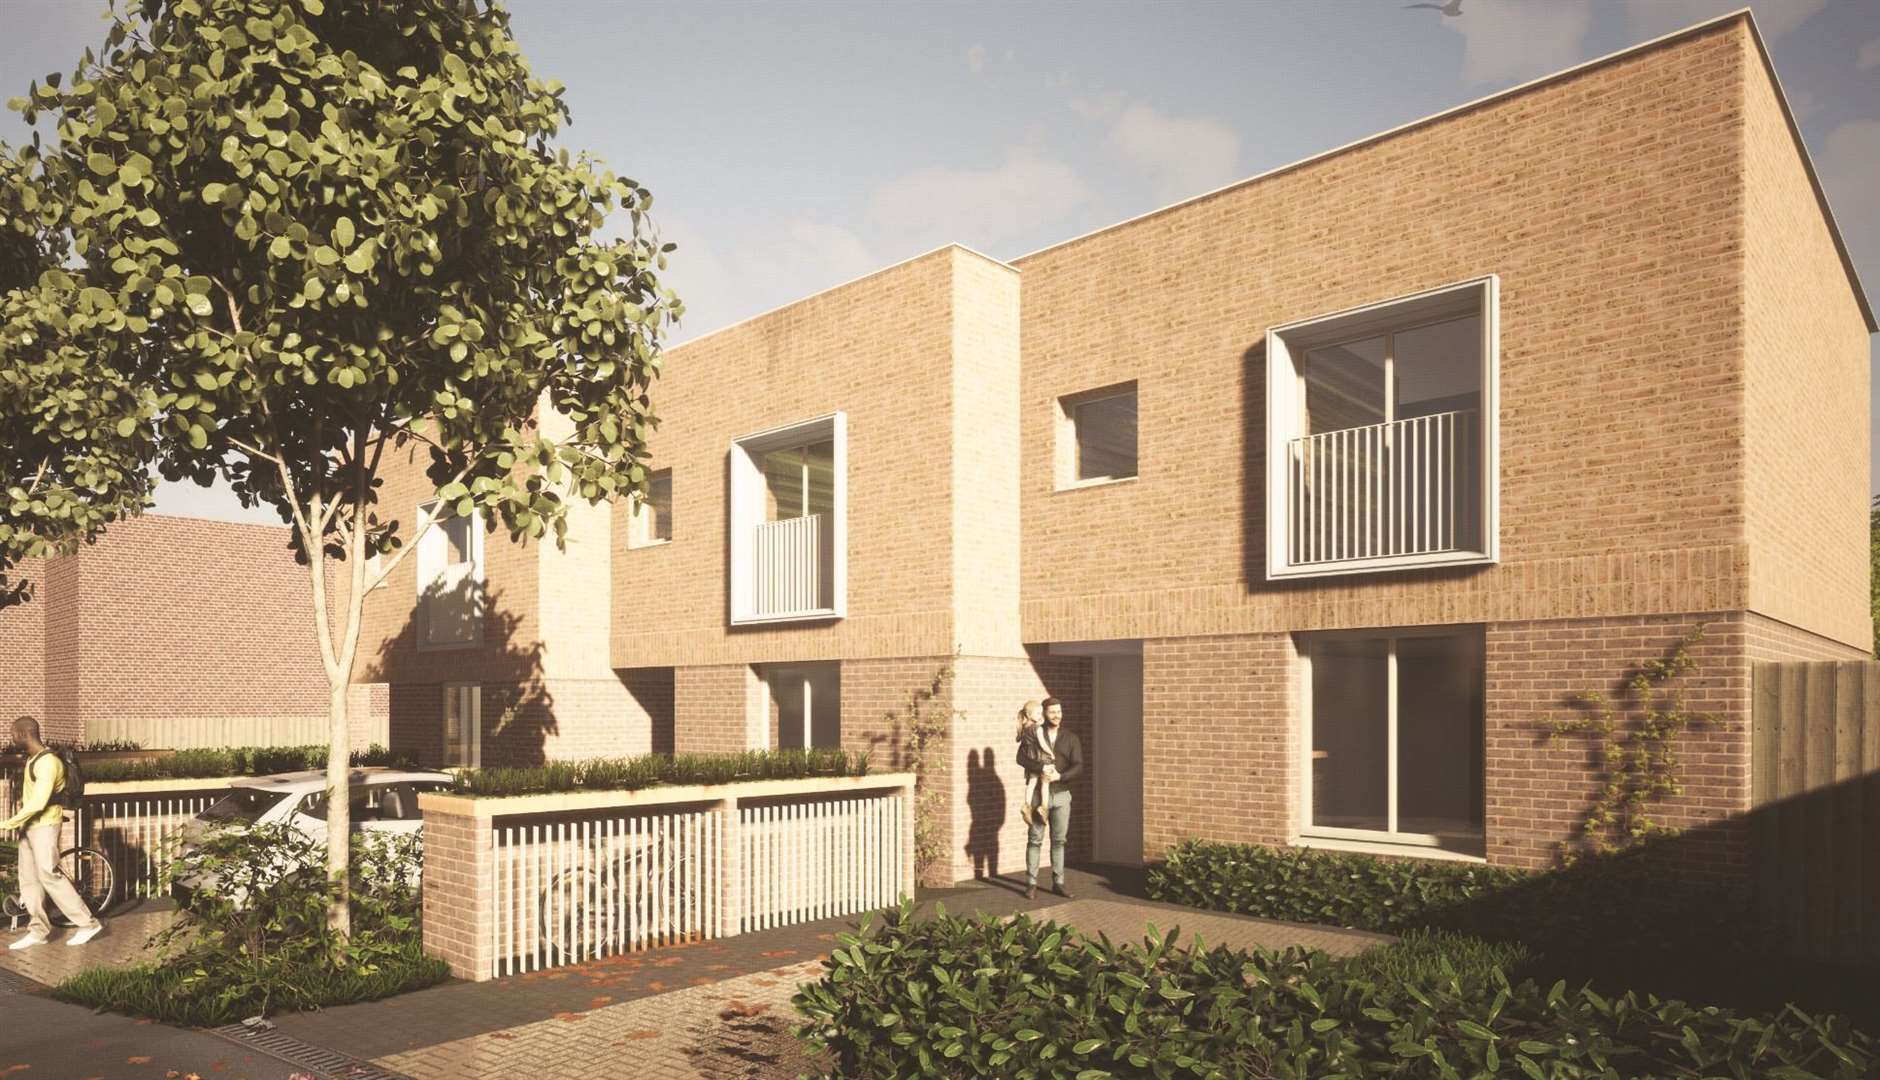 The properties will meet the "Passivhaus Standard". Picture: Golding Homes